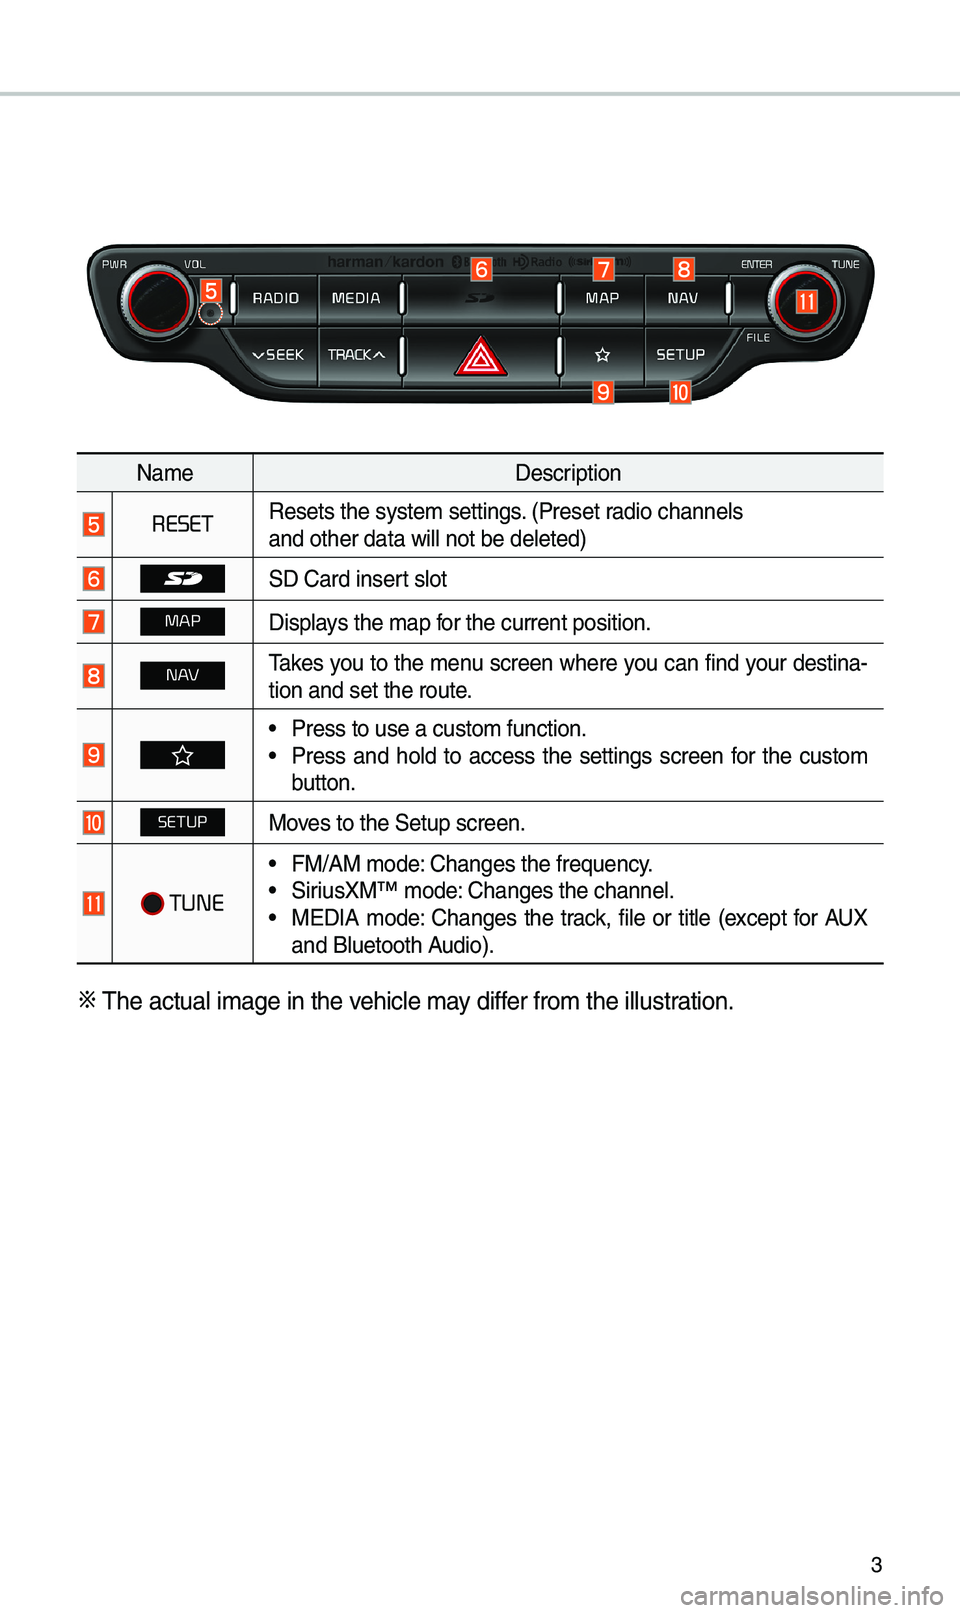 KIA NIRO PHEV 2019  Navigation System Quick Reference Guide 3
Nam\fD\fscription
RESETR\fs\fts th\f syst\fm s\ftt\Sings. (Pr\fs\ft radio chann\fls
and oth\fr data will\S not b\f d\fl\ft\fd)
SD Card ins\frt slot
MAPDisplays th\f map for th\f curr\fnt posit\Sion.